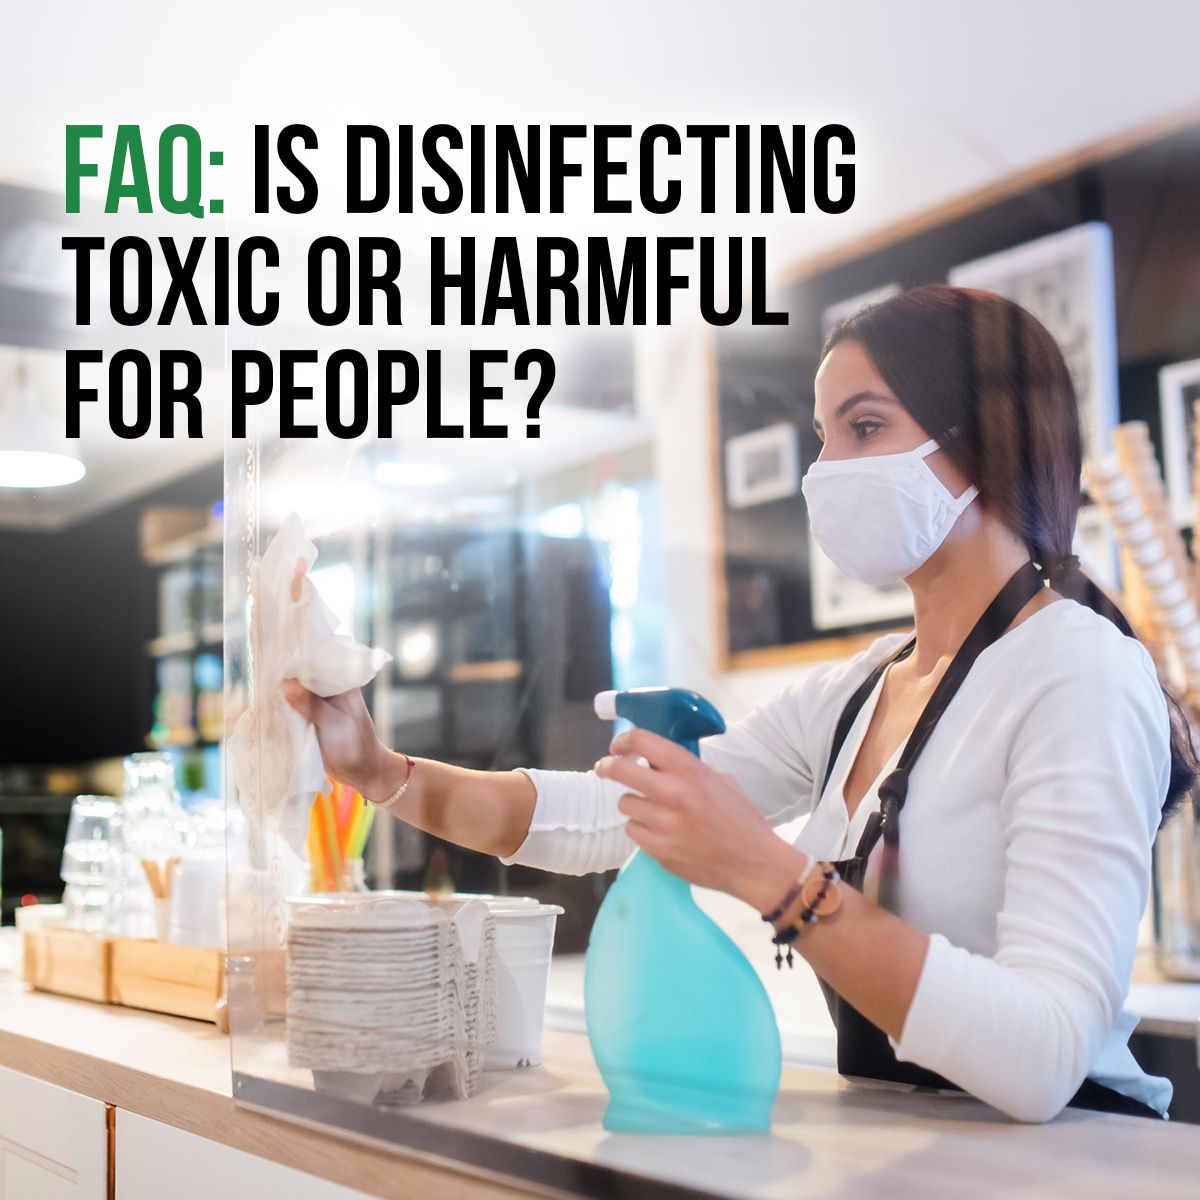 FAQ: Is Disinfecting Toxic or Harmful for People?